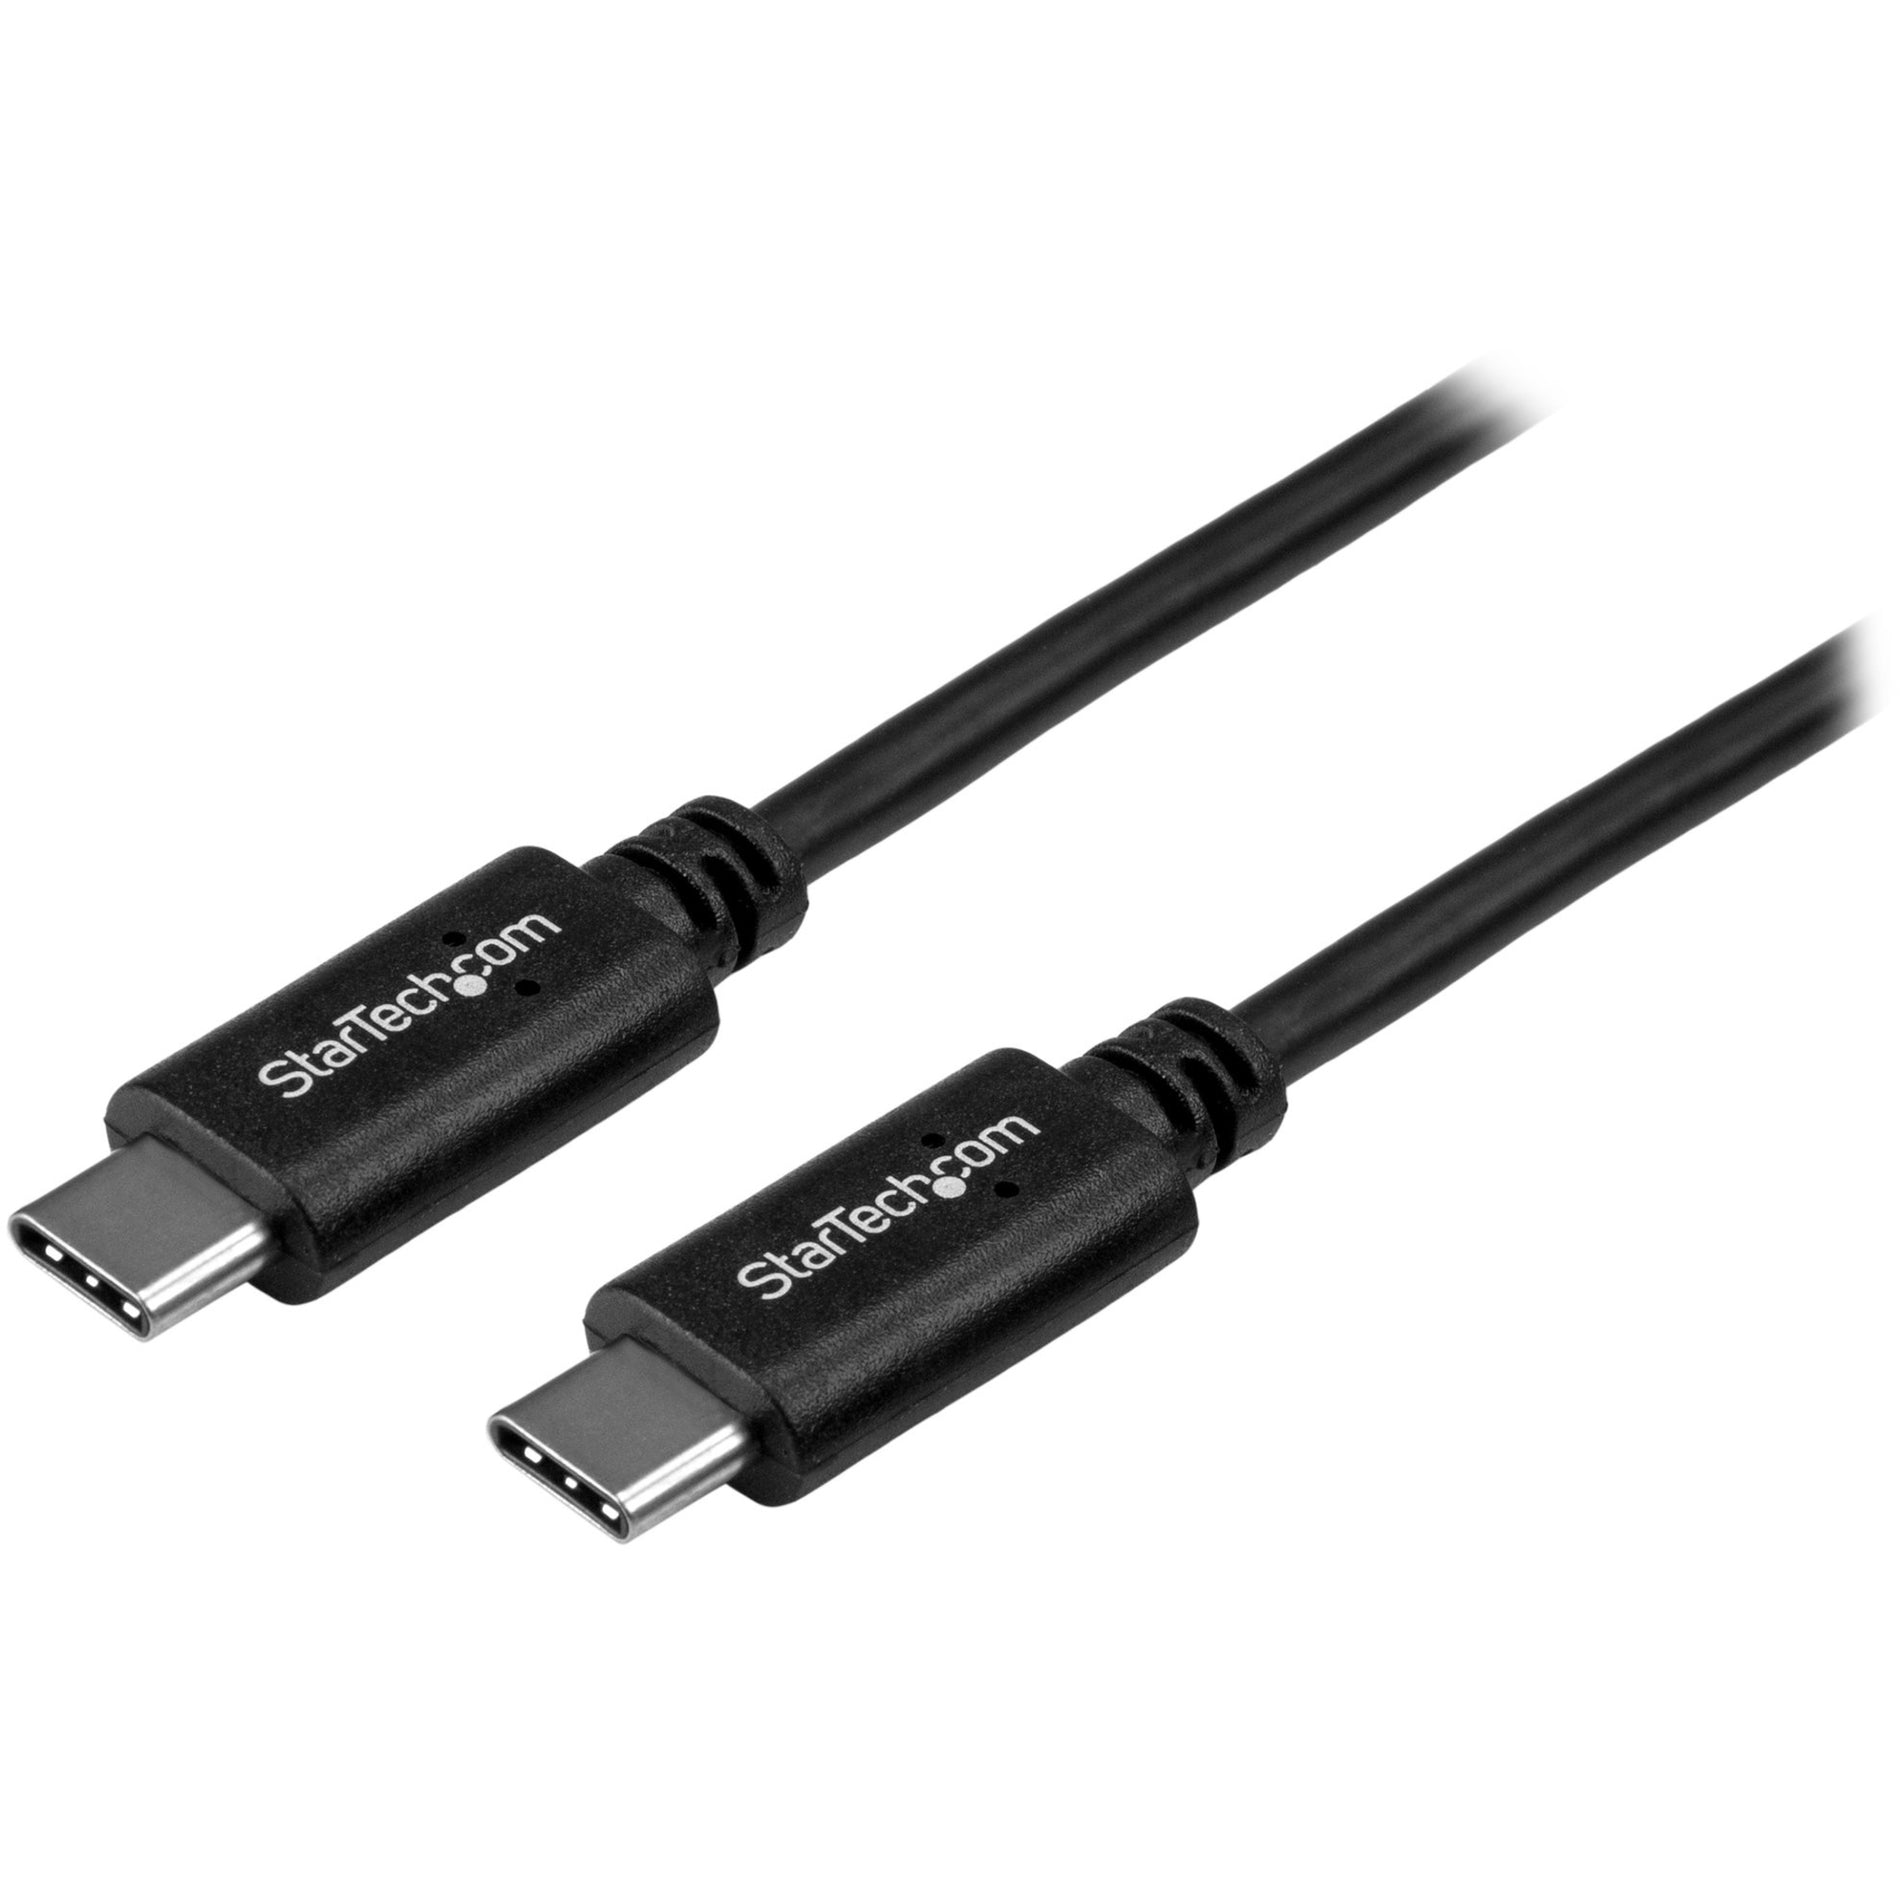 StarTech.com USB2CC1M USB-C Cable - M/M - 1m (3 ft.) - USB 2.0, Compatible with USB C Laptops & Mobile Devices